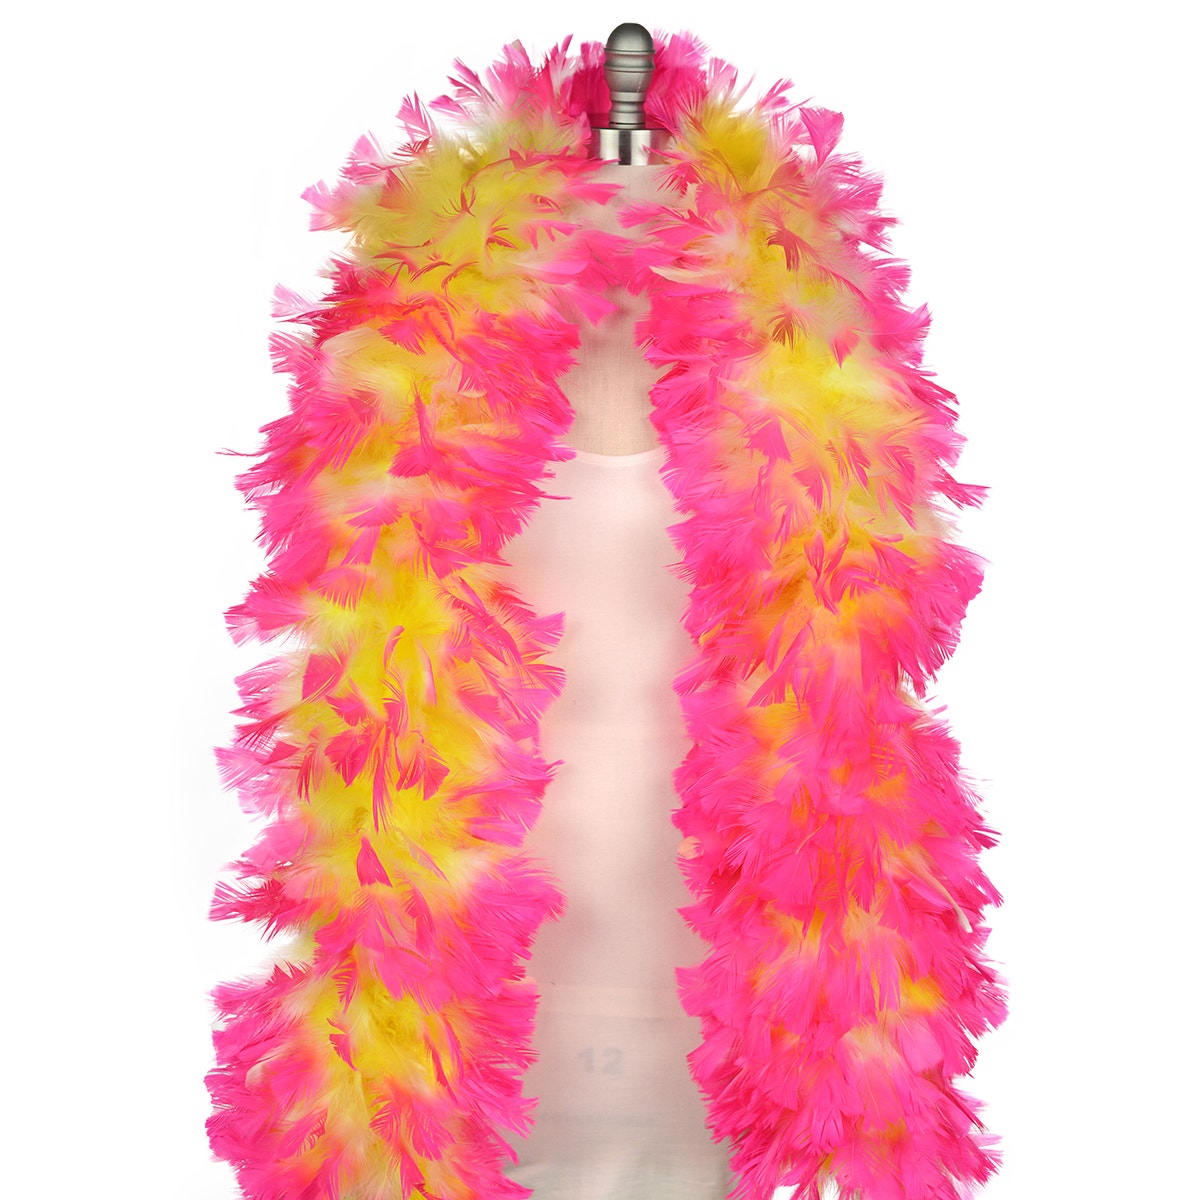 Turkey Plumage Feathers, Assorted Bright Hues, Assorted Sizes, 14 grams -  CK-450001, Dixon Ticonderoga Co - Pacon